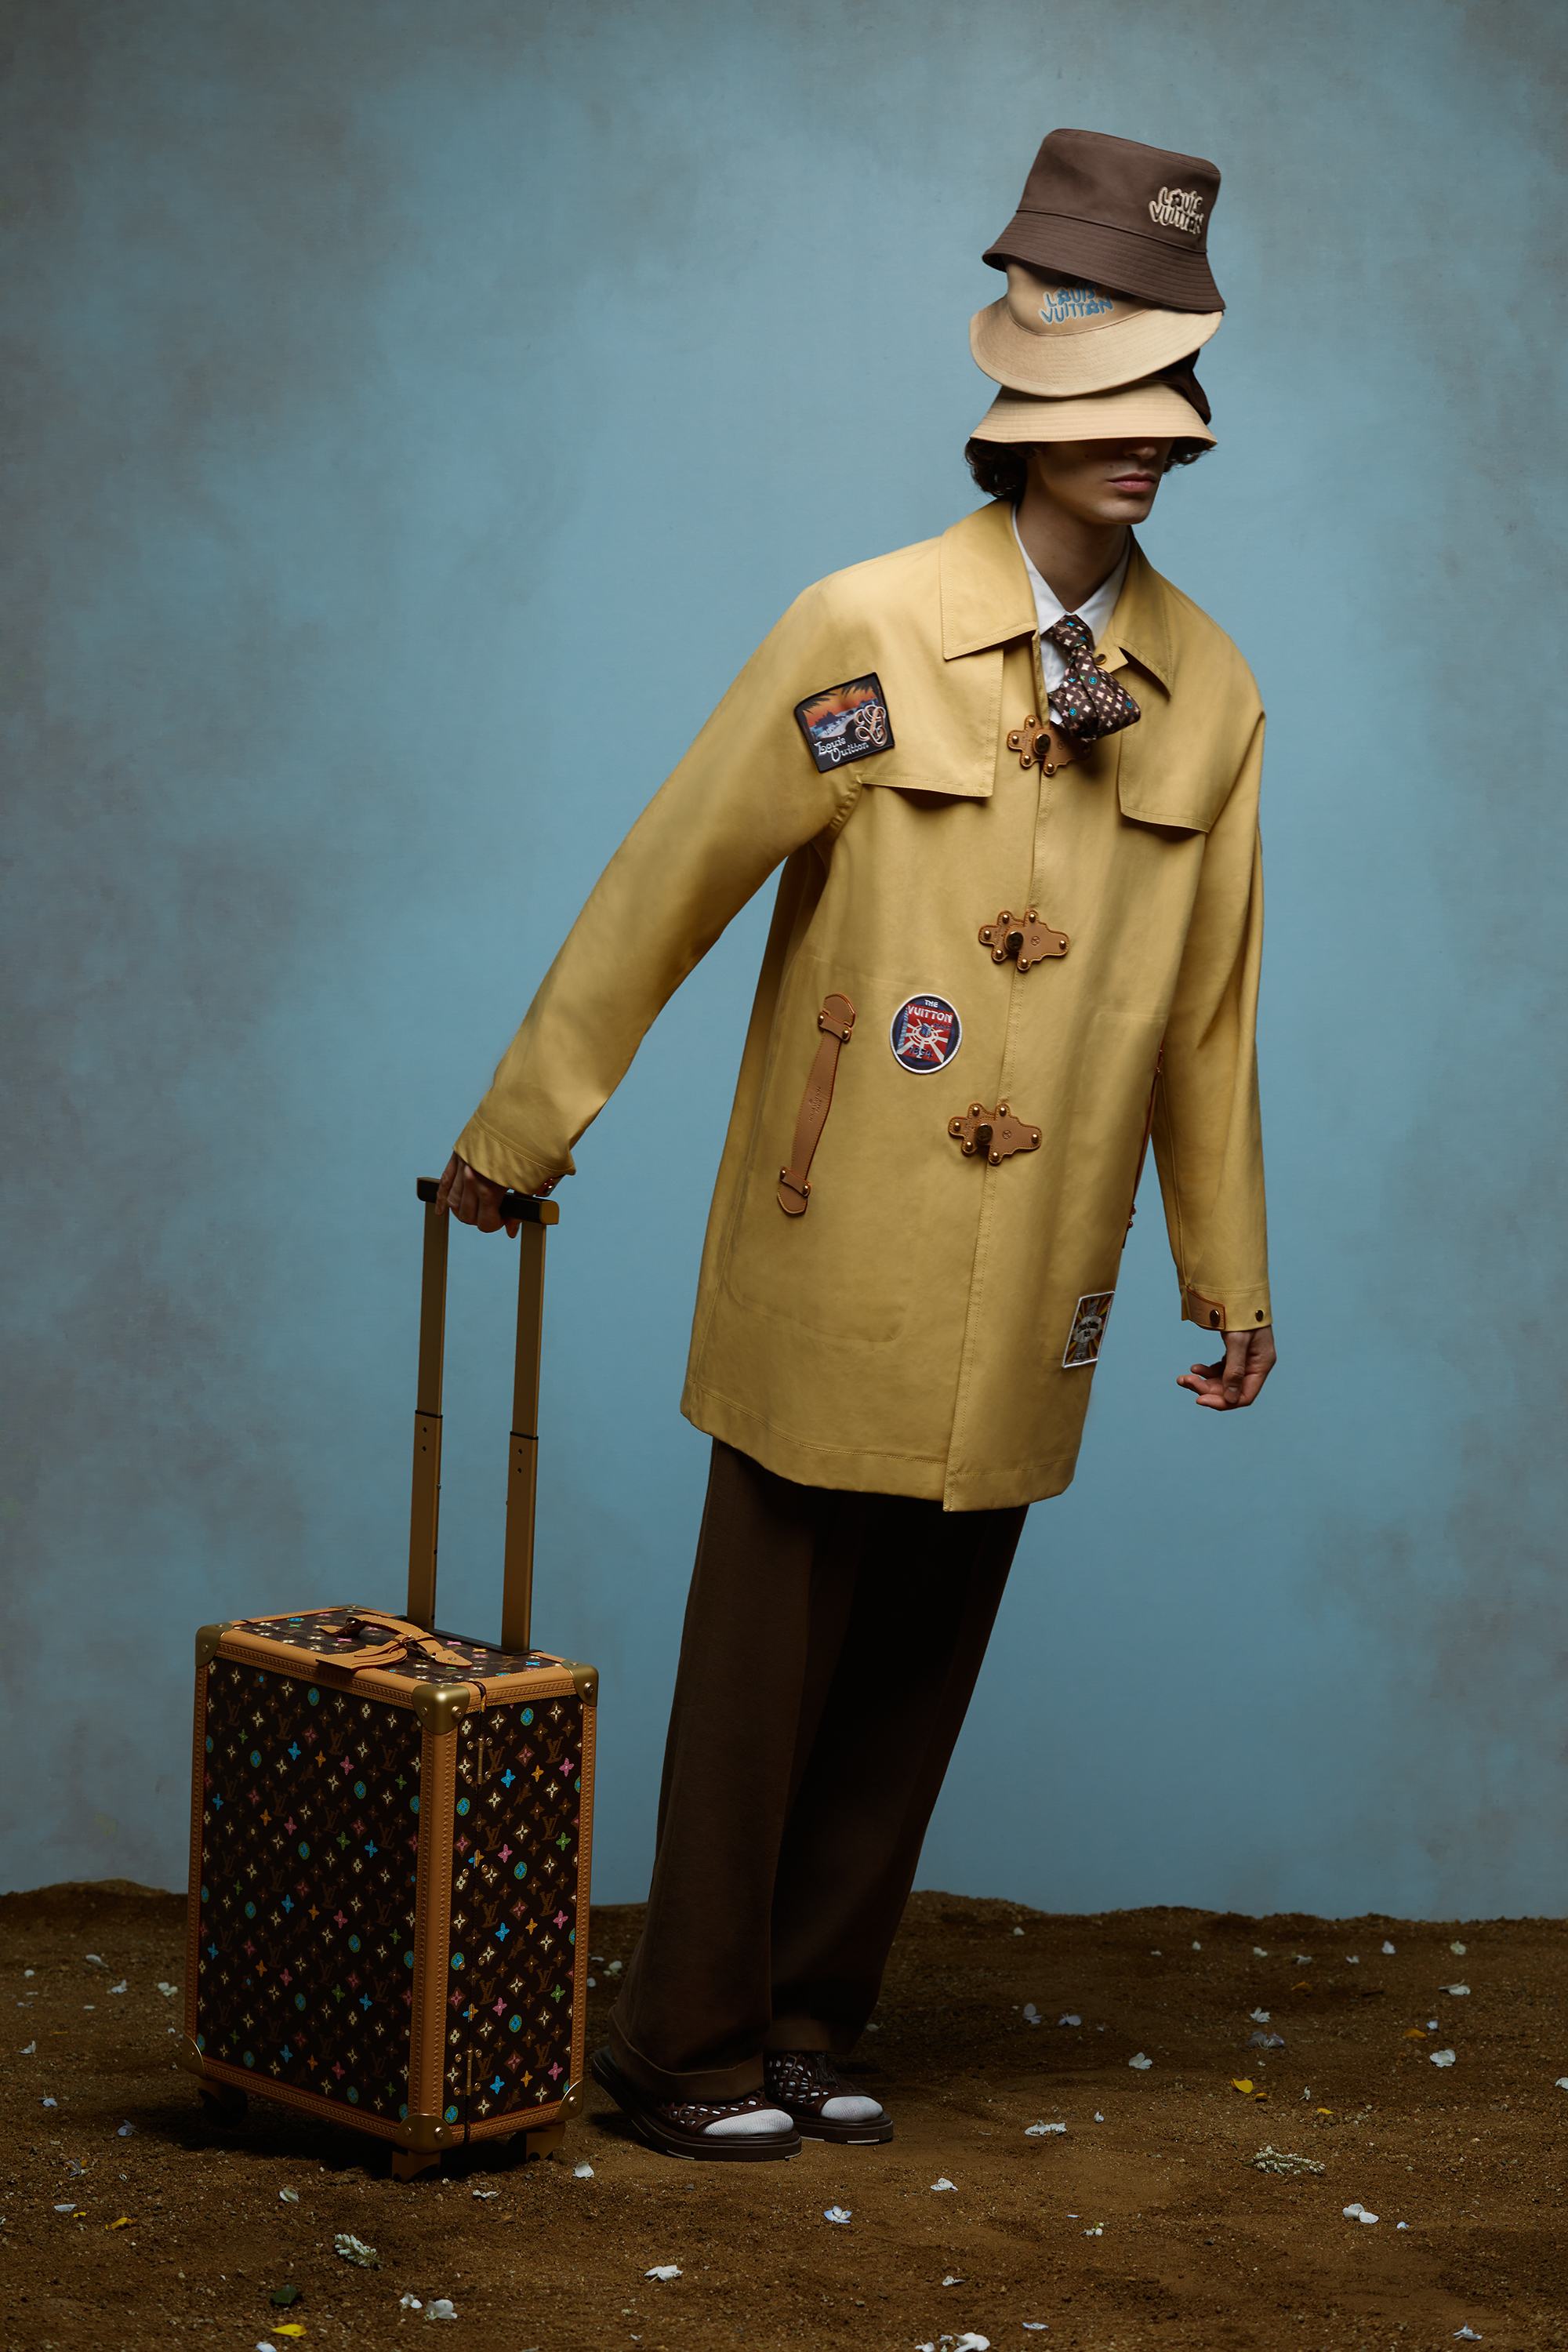 Person in a stylish trench coat with patches, hat, holding a patterned suitcase